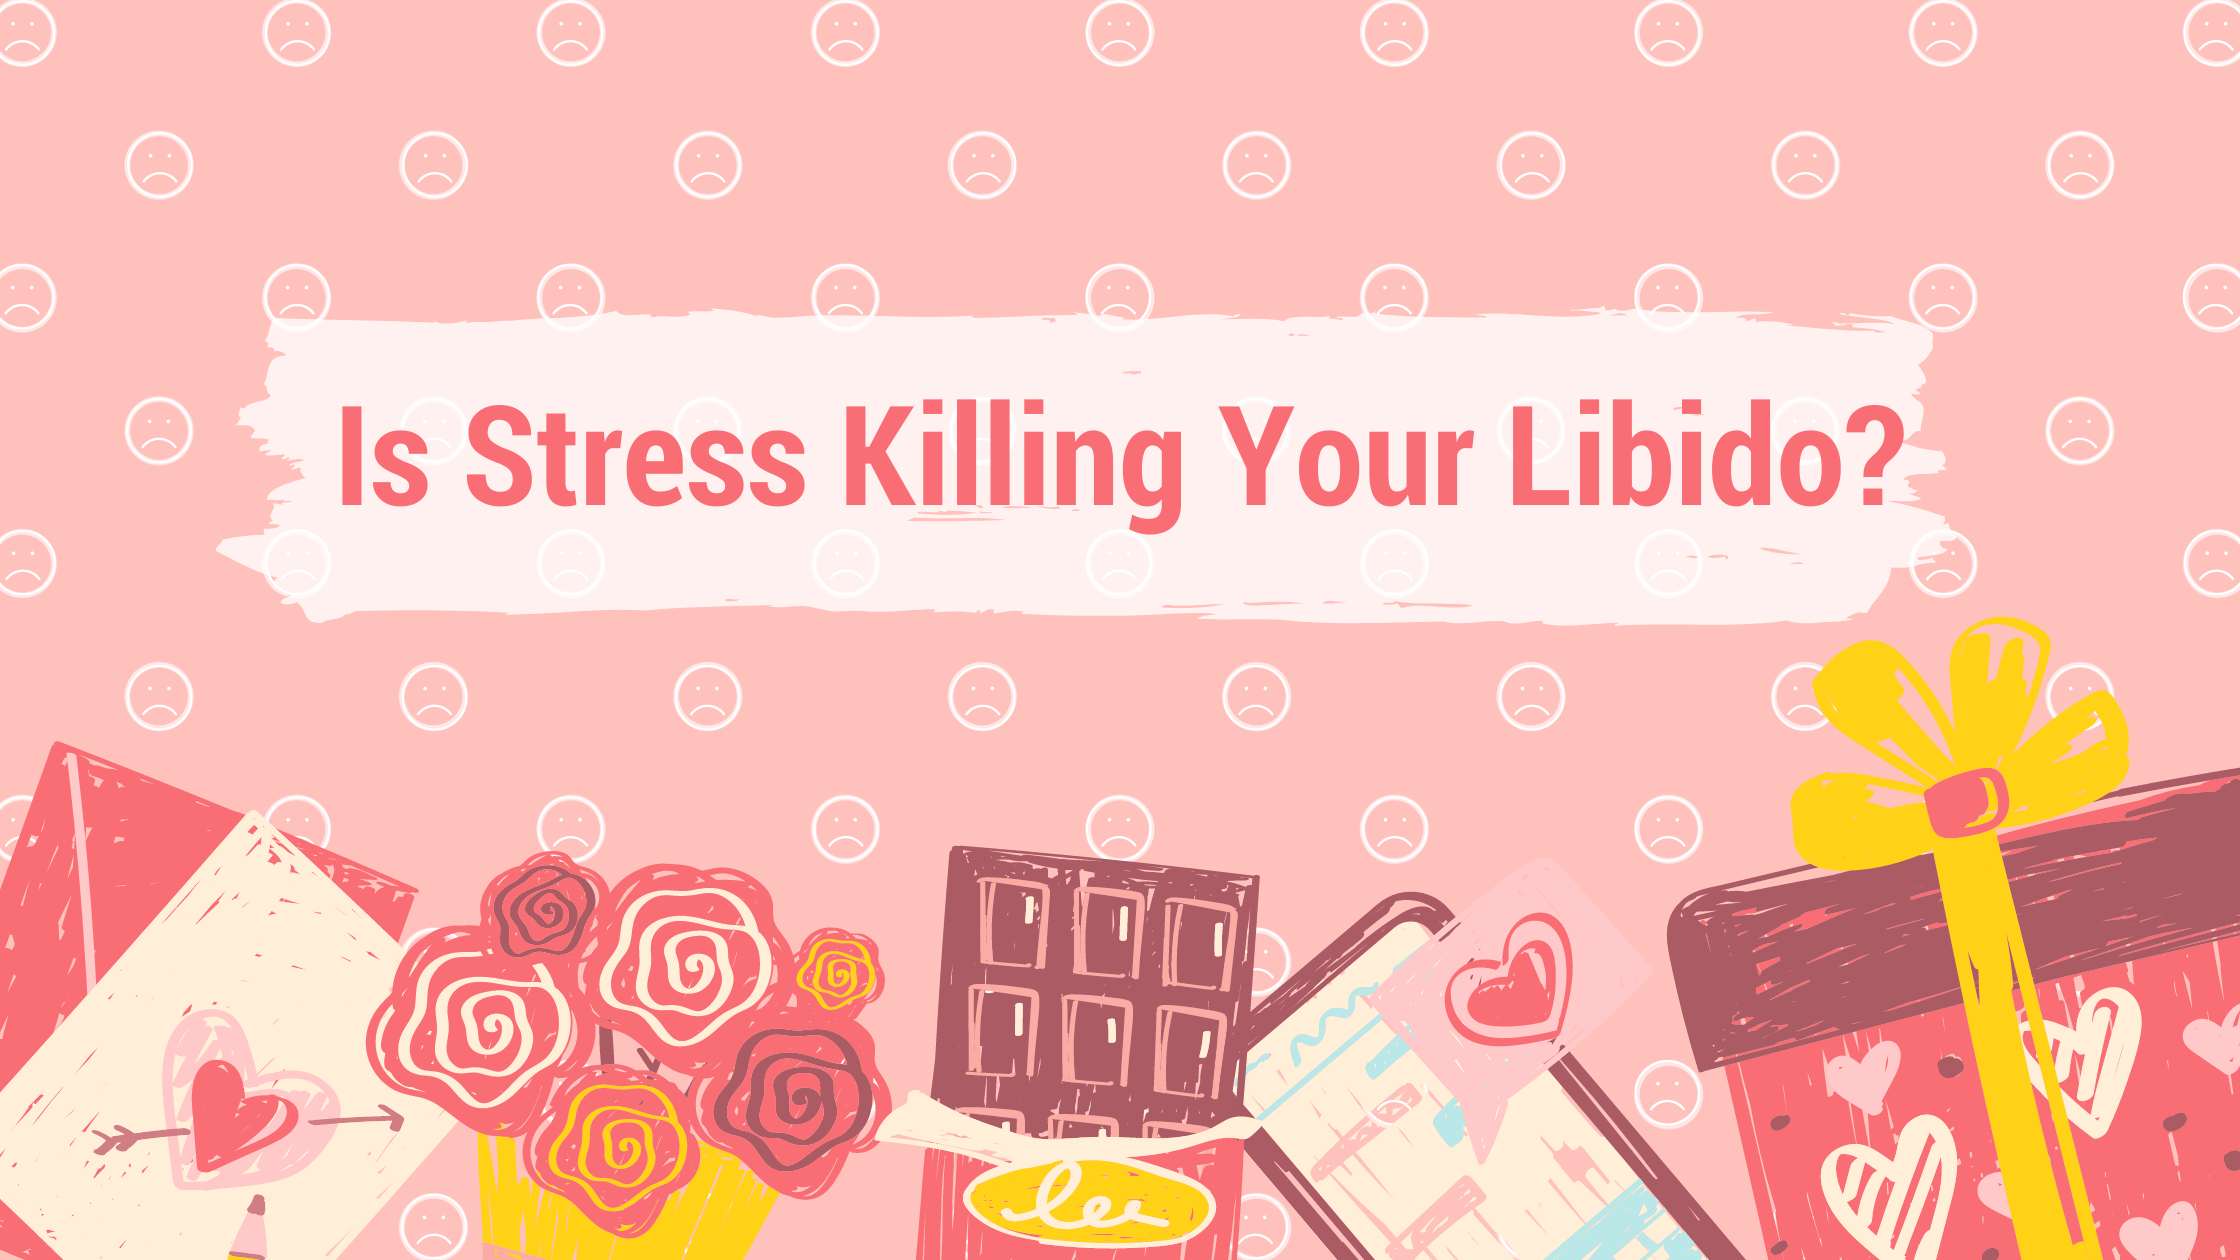 IS STRESS KILLING YOUR LIBIDO